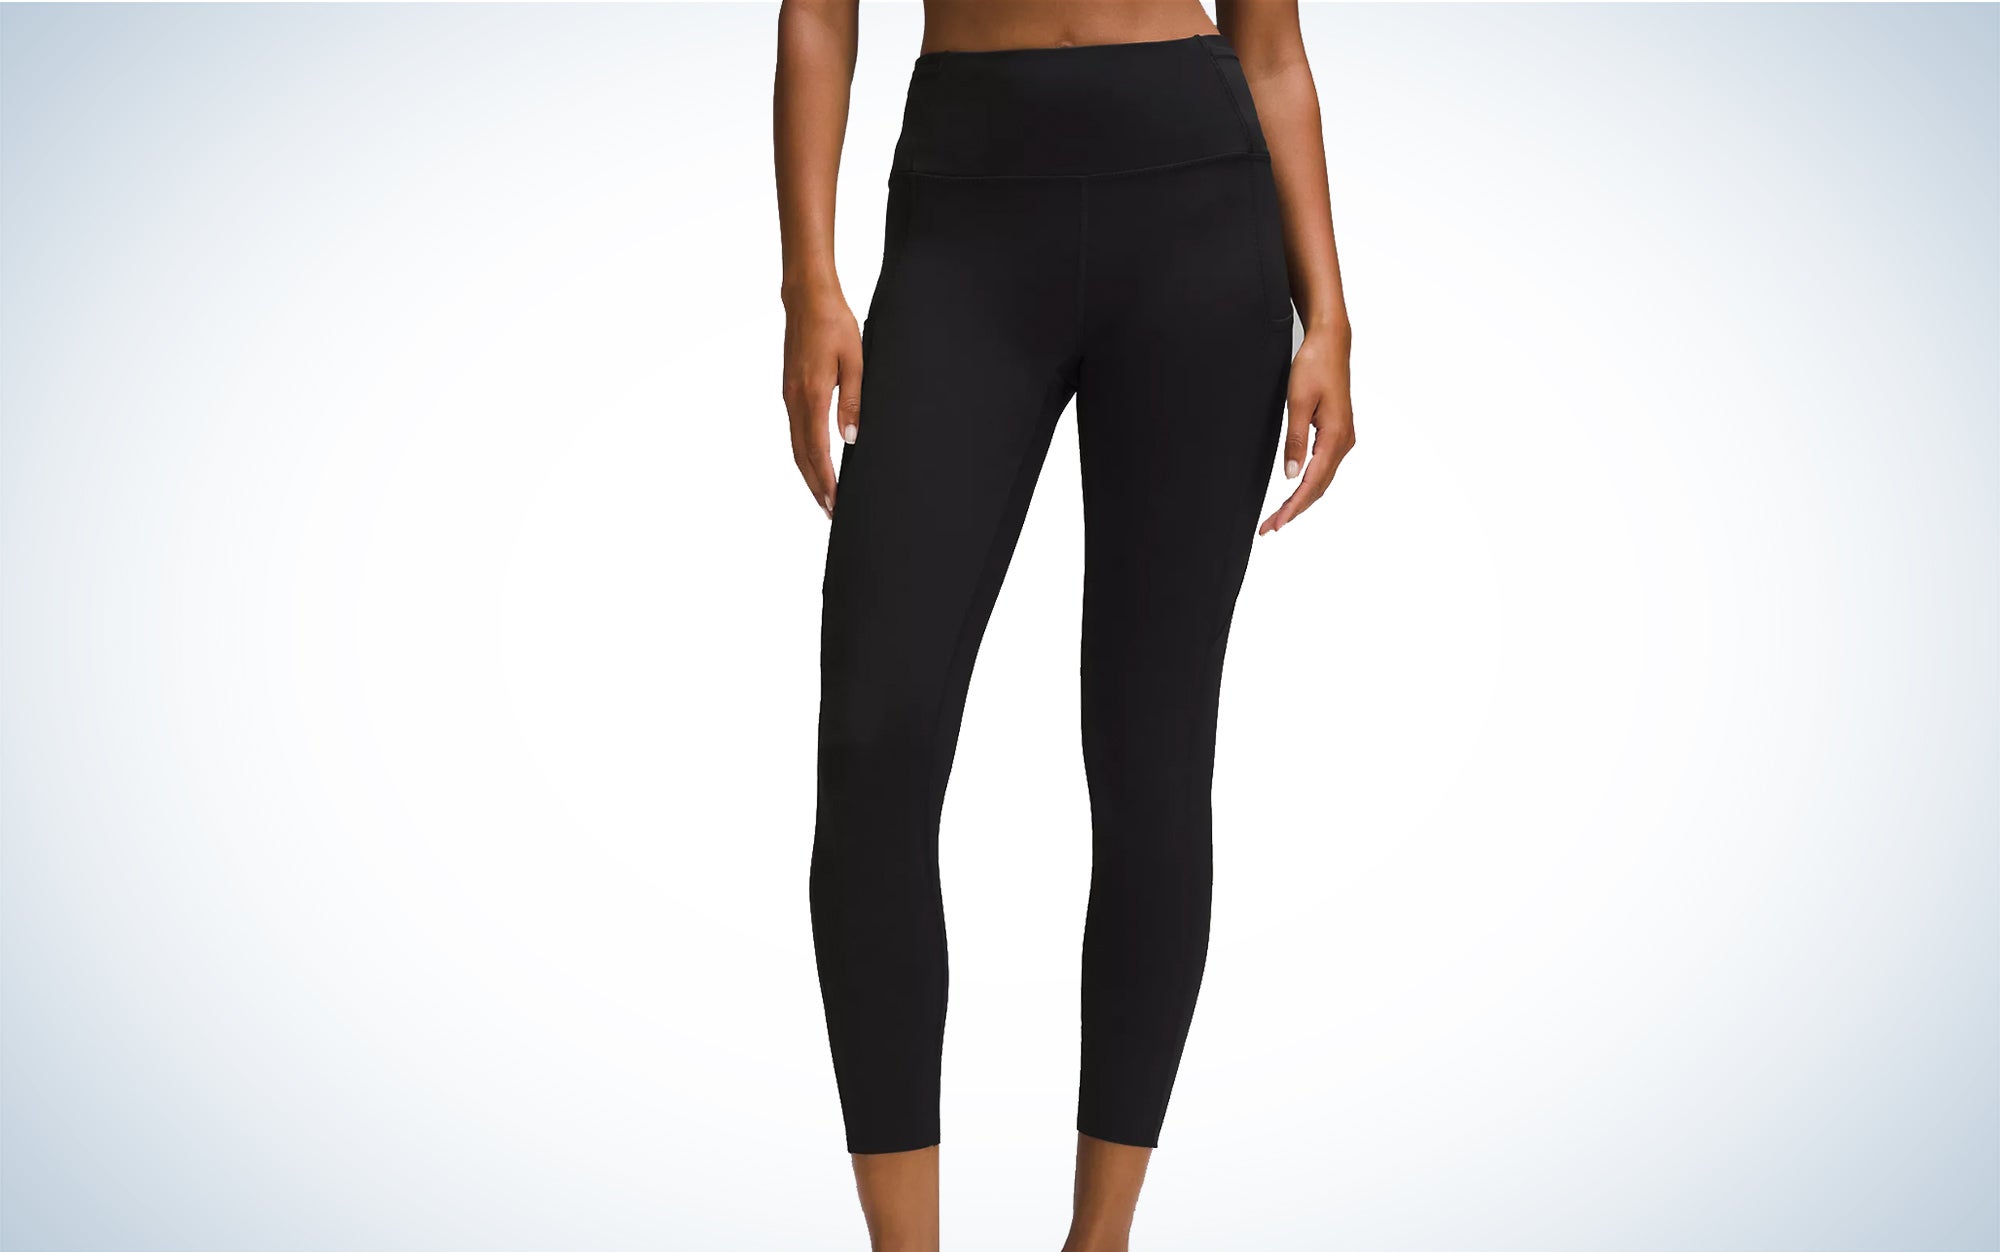 We tested the Lululemon Fast and Free High-Rise Tight.